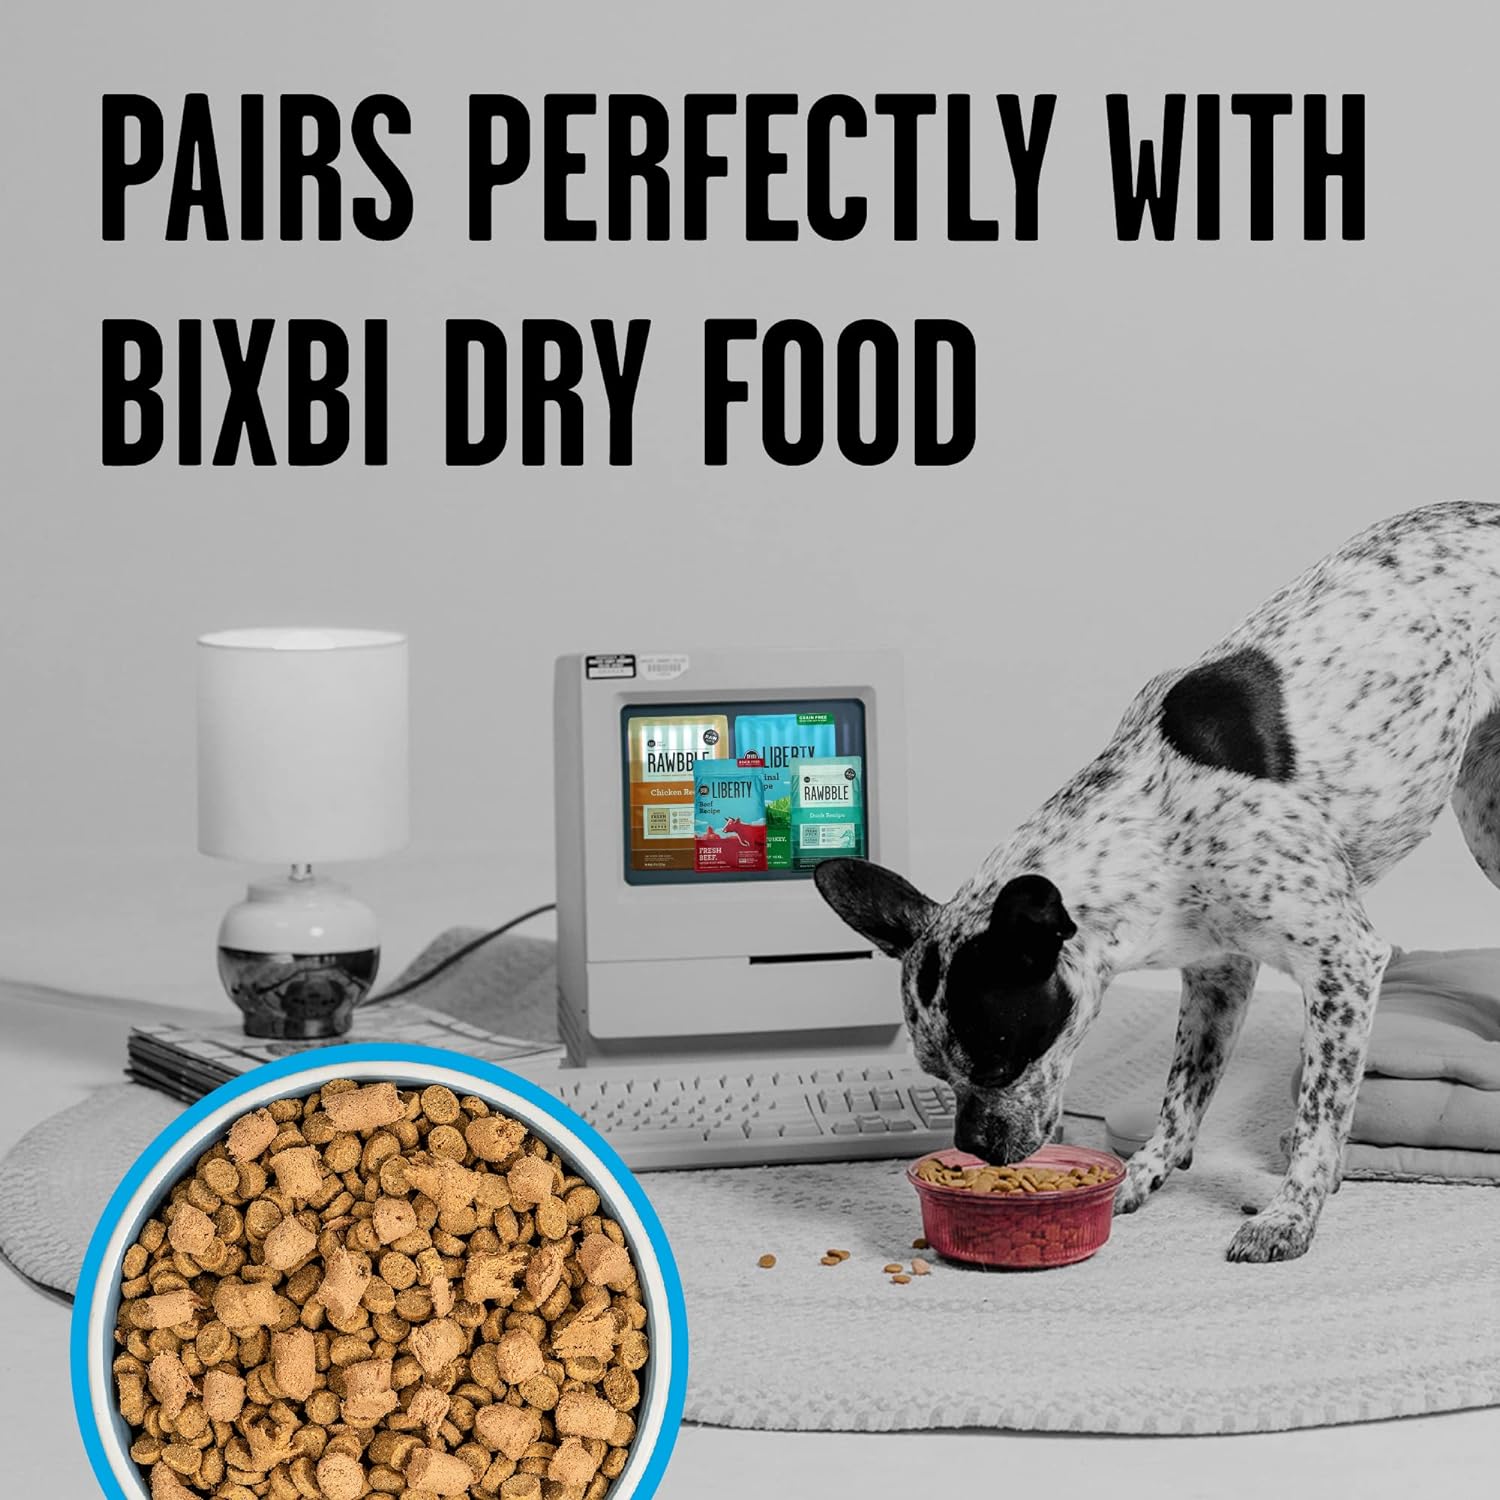 BIXBI Rawbble Freeze Dried Dog Food, Chicken & Salmon Recipe, 12 oz - 94% Meat and Organs, No Fillers - Pantry-Friendly Raw Dog Food for Meal, Treat or Food Topper - USA Made in Small Batches : Pet Supplies